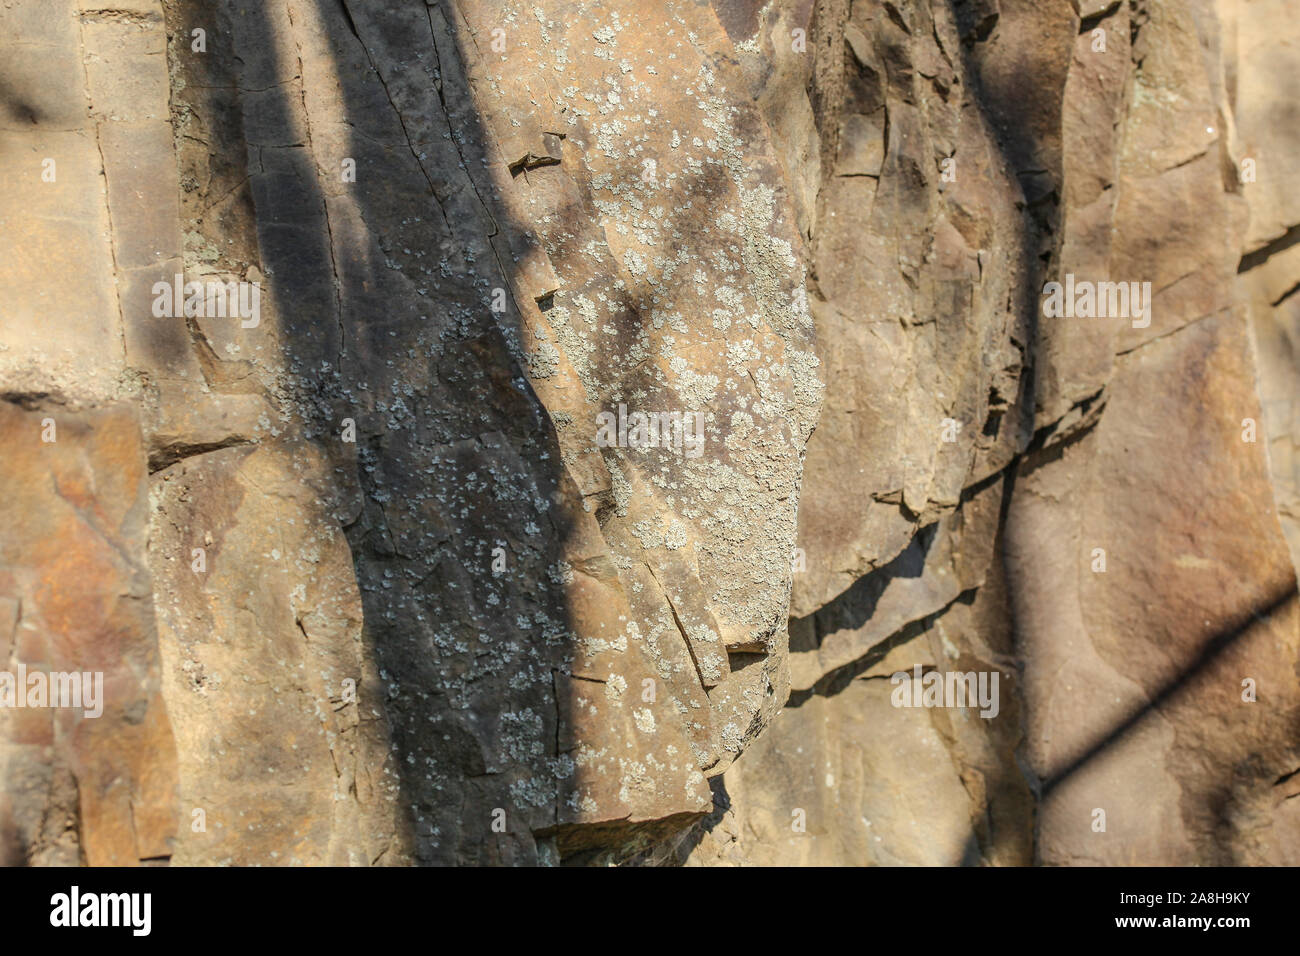 Small patches of lichen growing on flat rocks Stock Photo